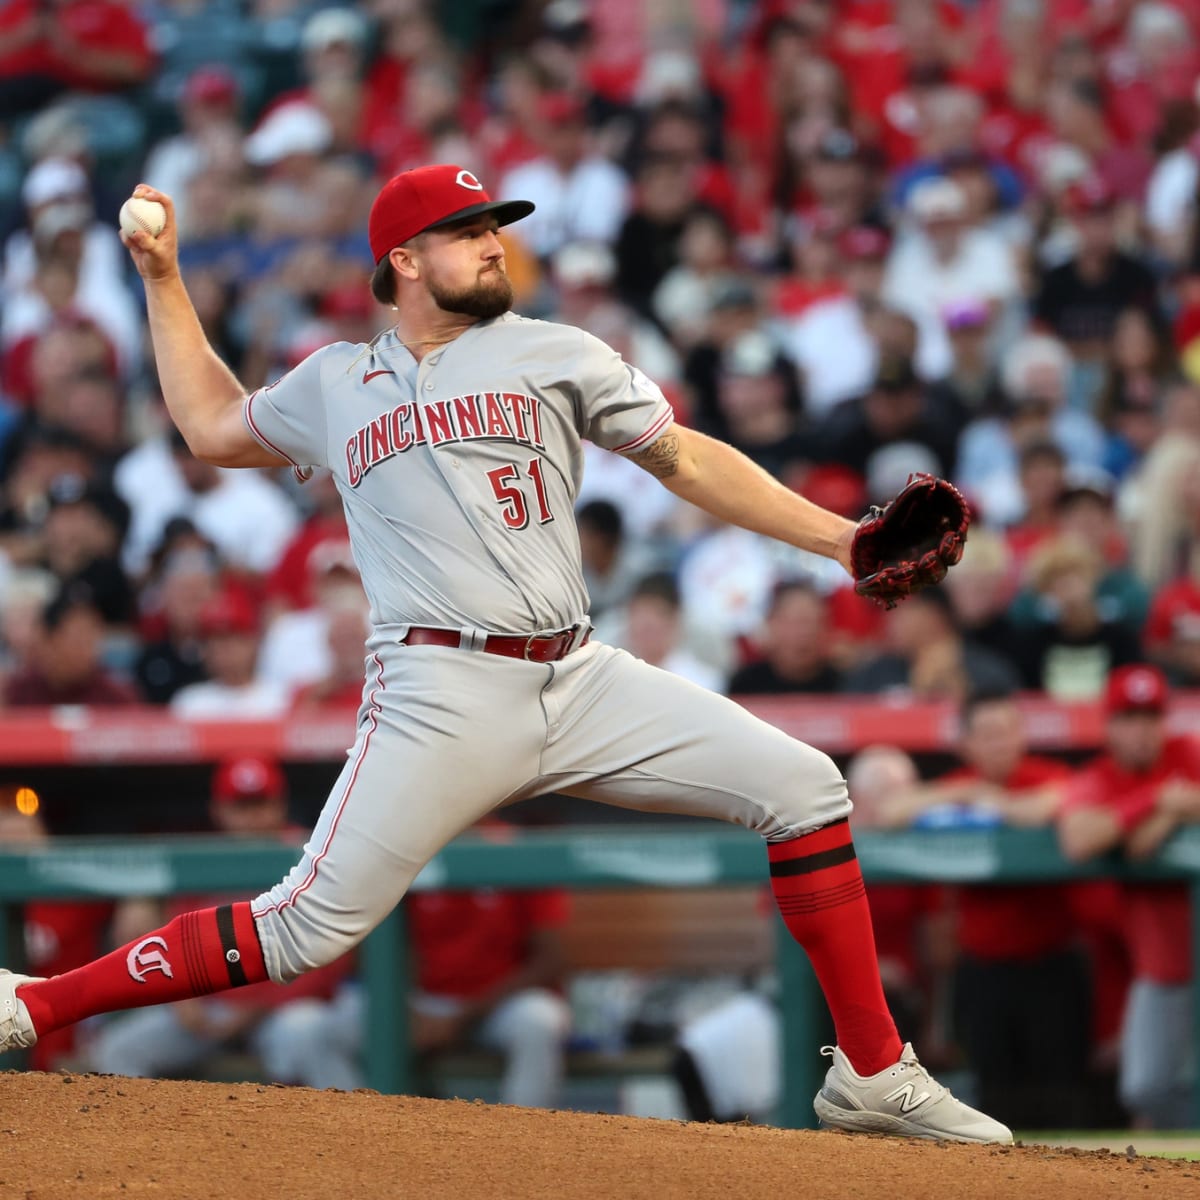 Reds rookie pitcher first in last 50 years to allow homers on first 2  career pitches - The San Diego Union-Tribune